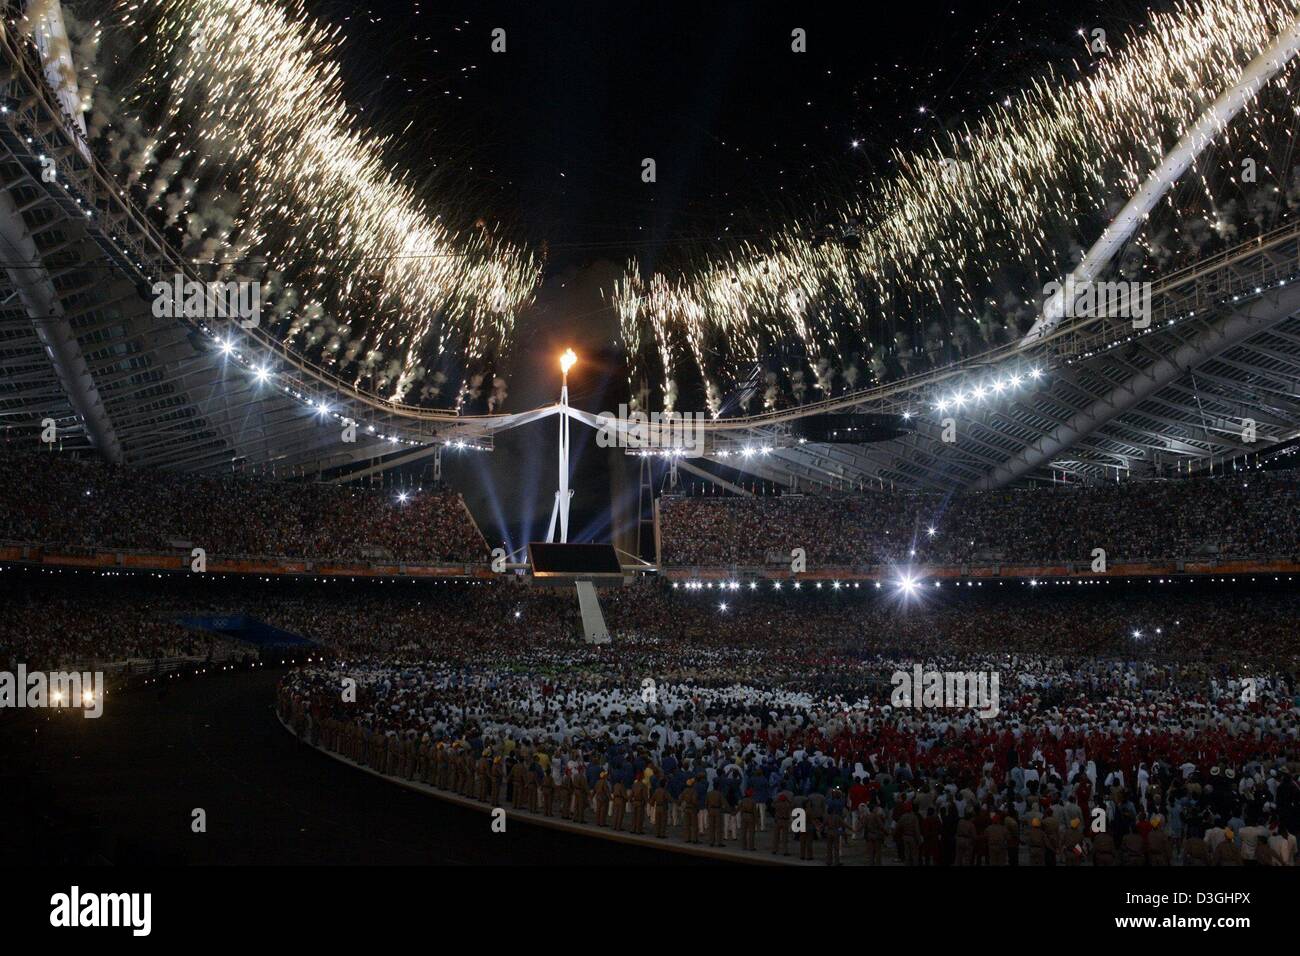 (dpa) - Fireworks illuminate the sky over the Olympic Stadium as the Olympic Flame is lit during the opening ceremony of the 2004 Olympic Games in Athens, Friday 13 August 2004. Stock Photo